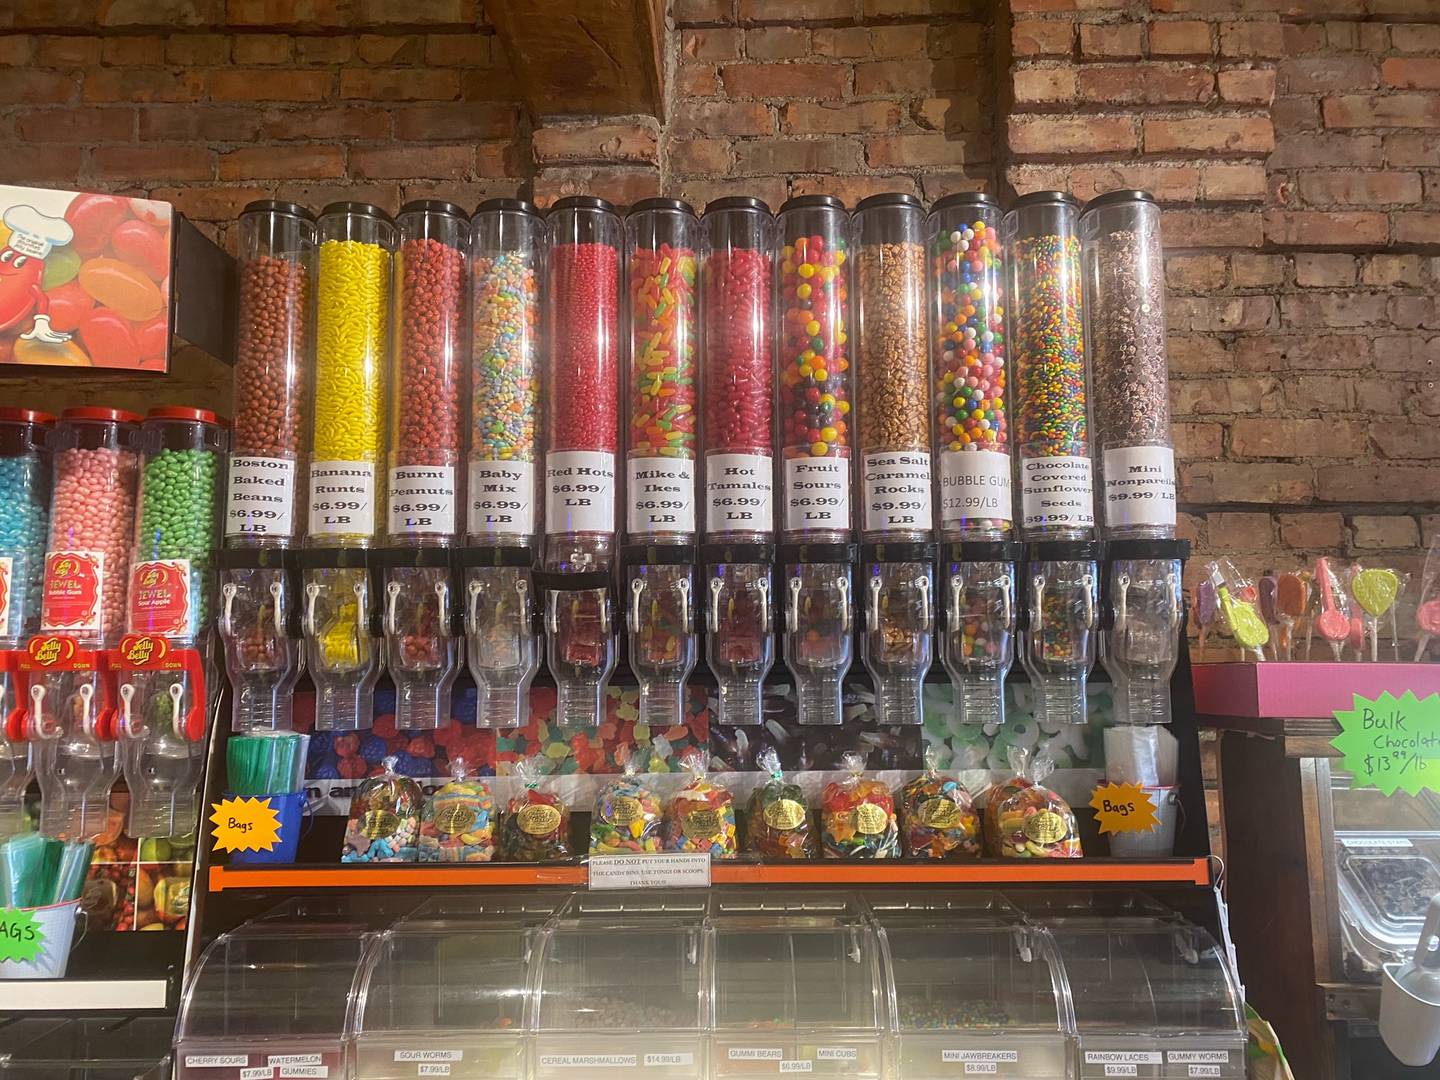 Customers will be able to purchase many nostalgic and hard-to-find candies. The shop offers glass bottled sodas, unique merchandise, along with a variety of toys, games, and gifts.